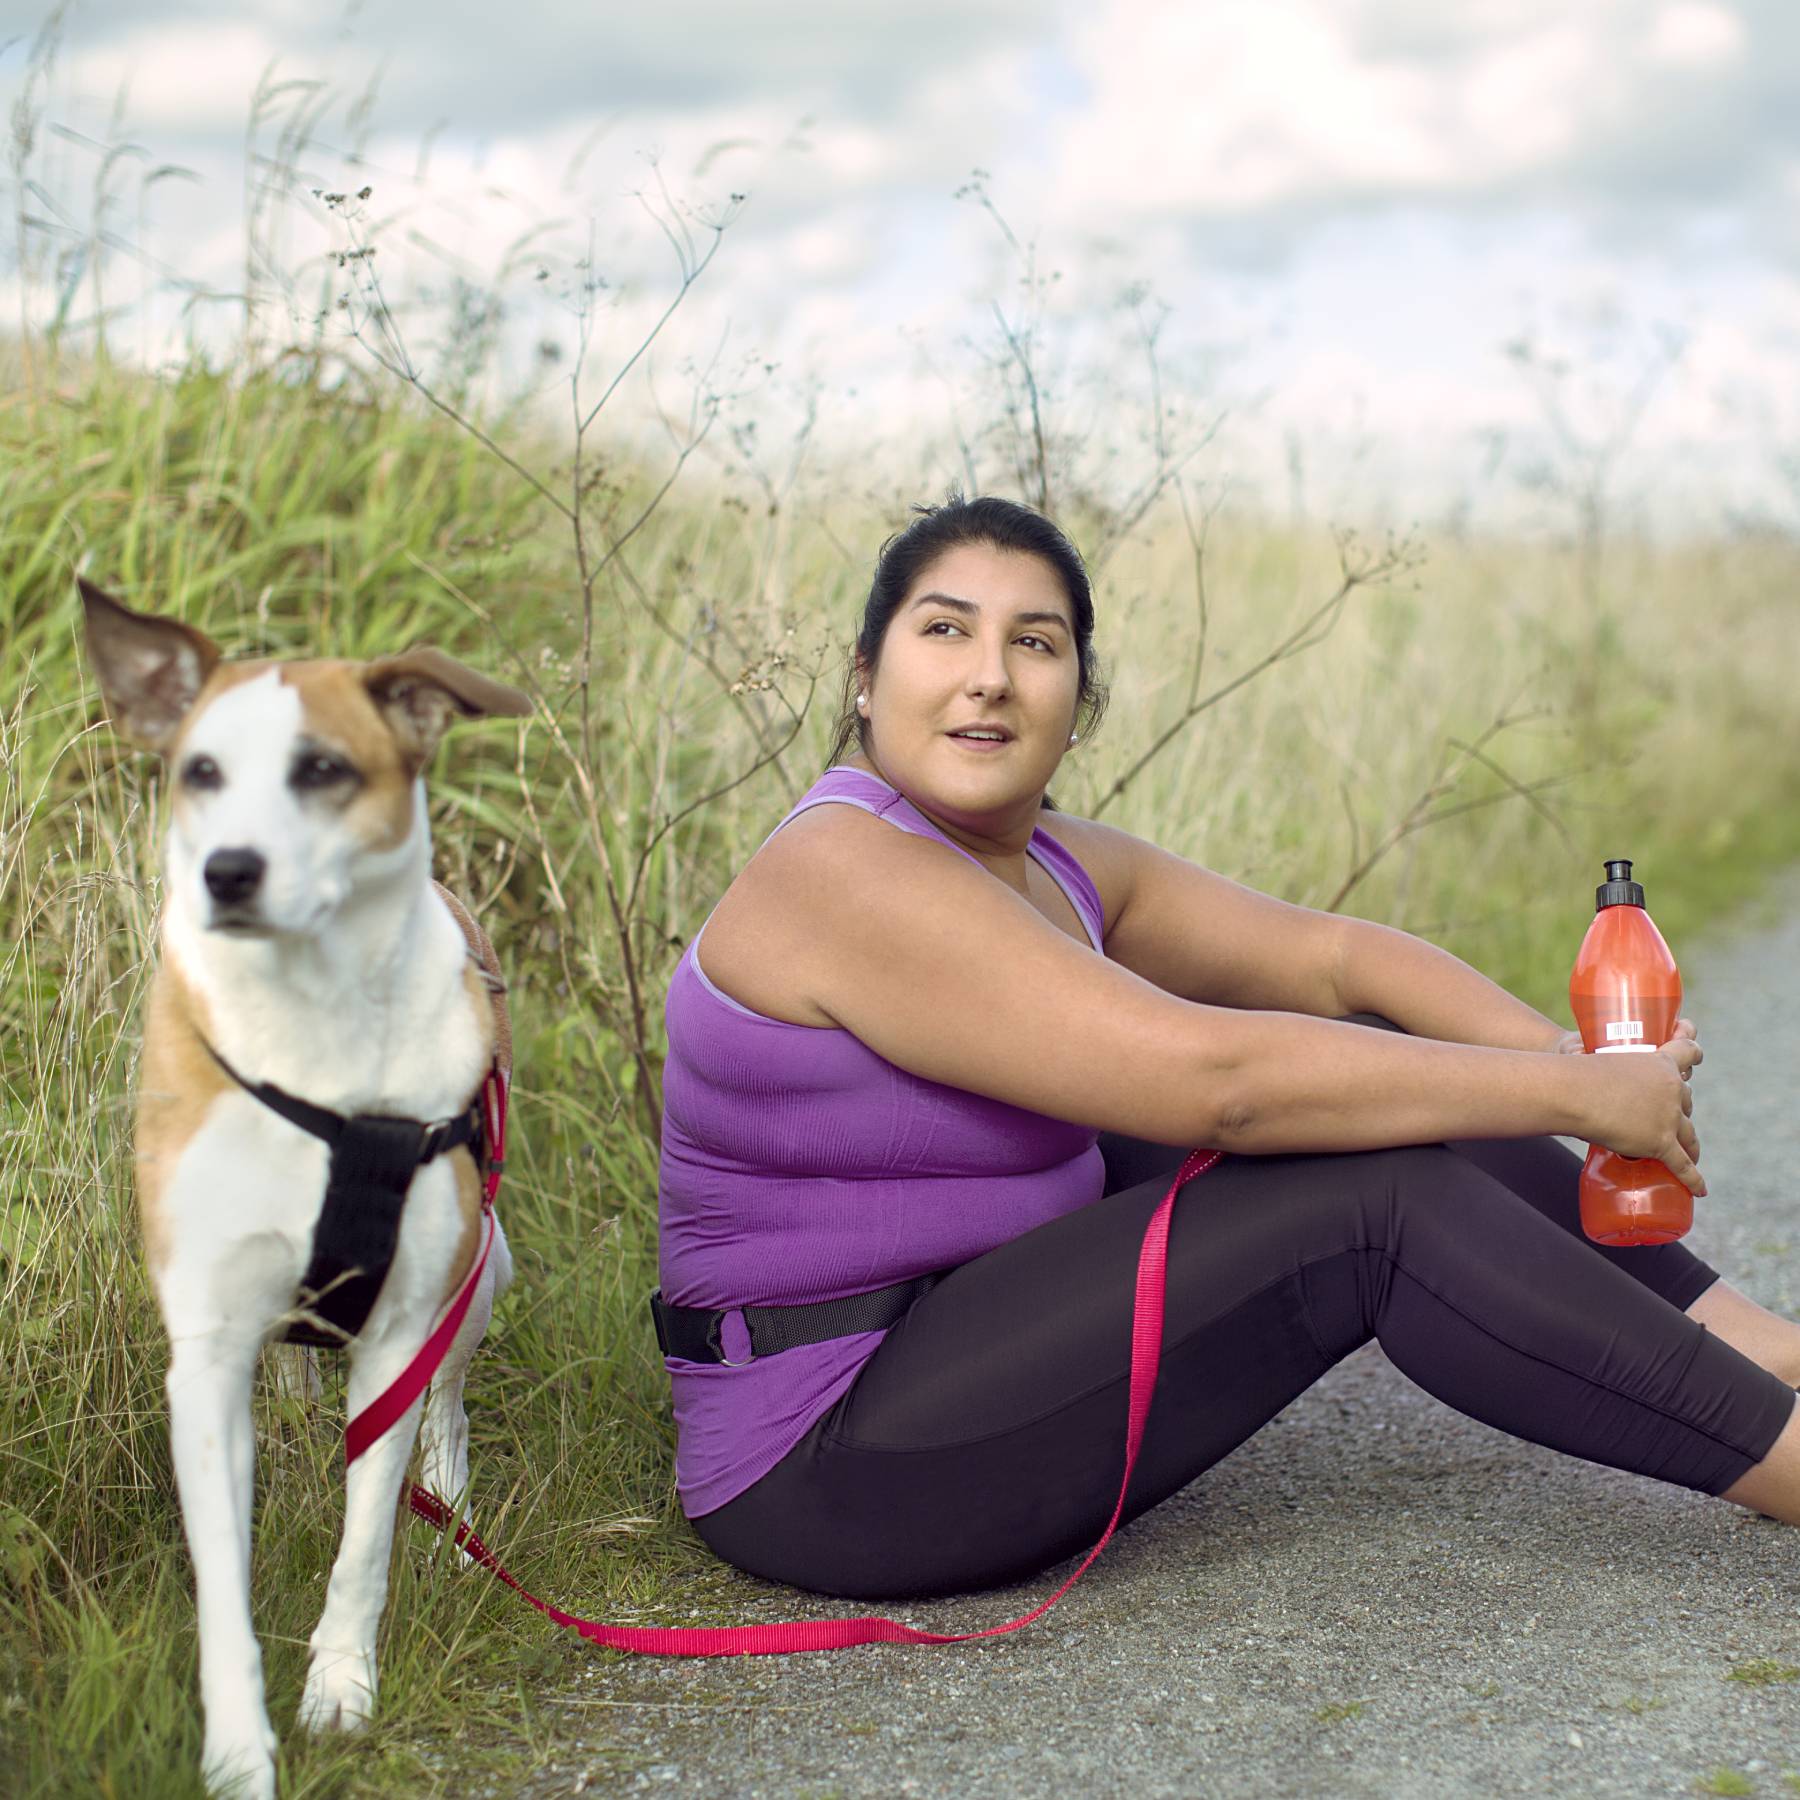 Woman sits on pavement after a run with dog by her side and water bottle in her hand.